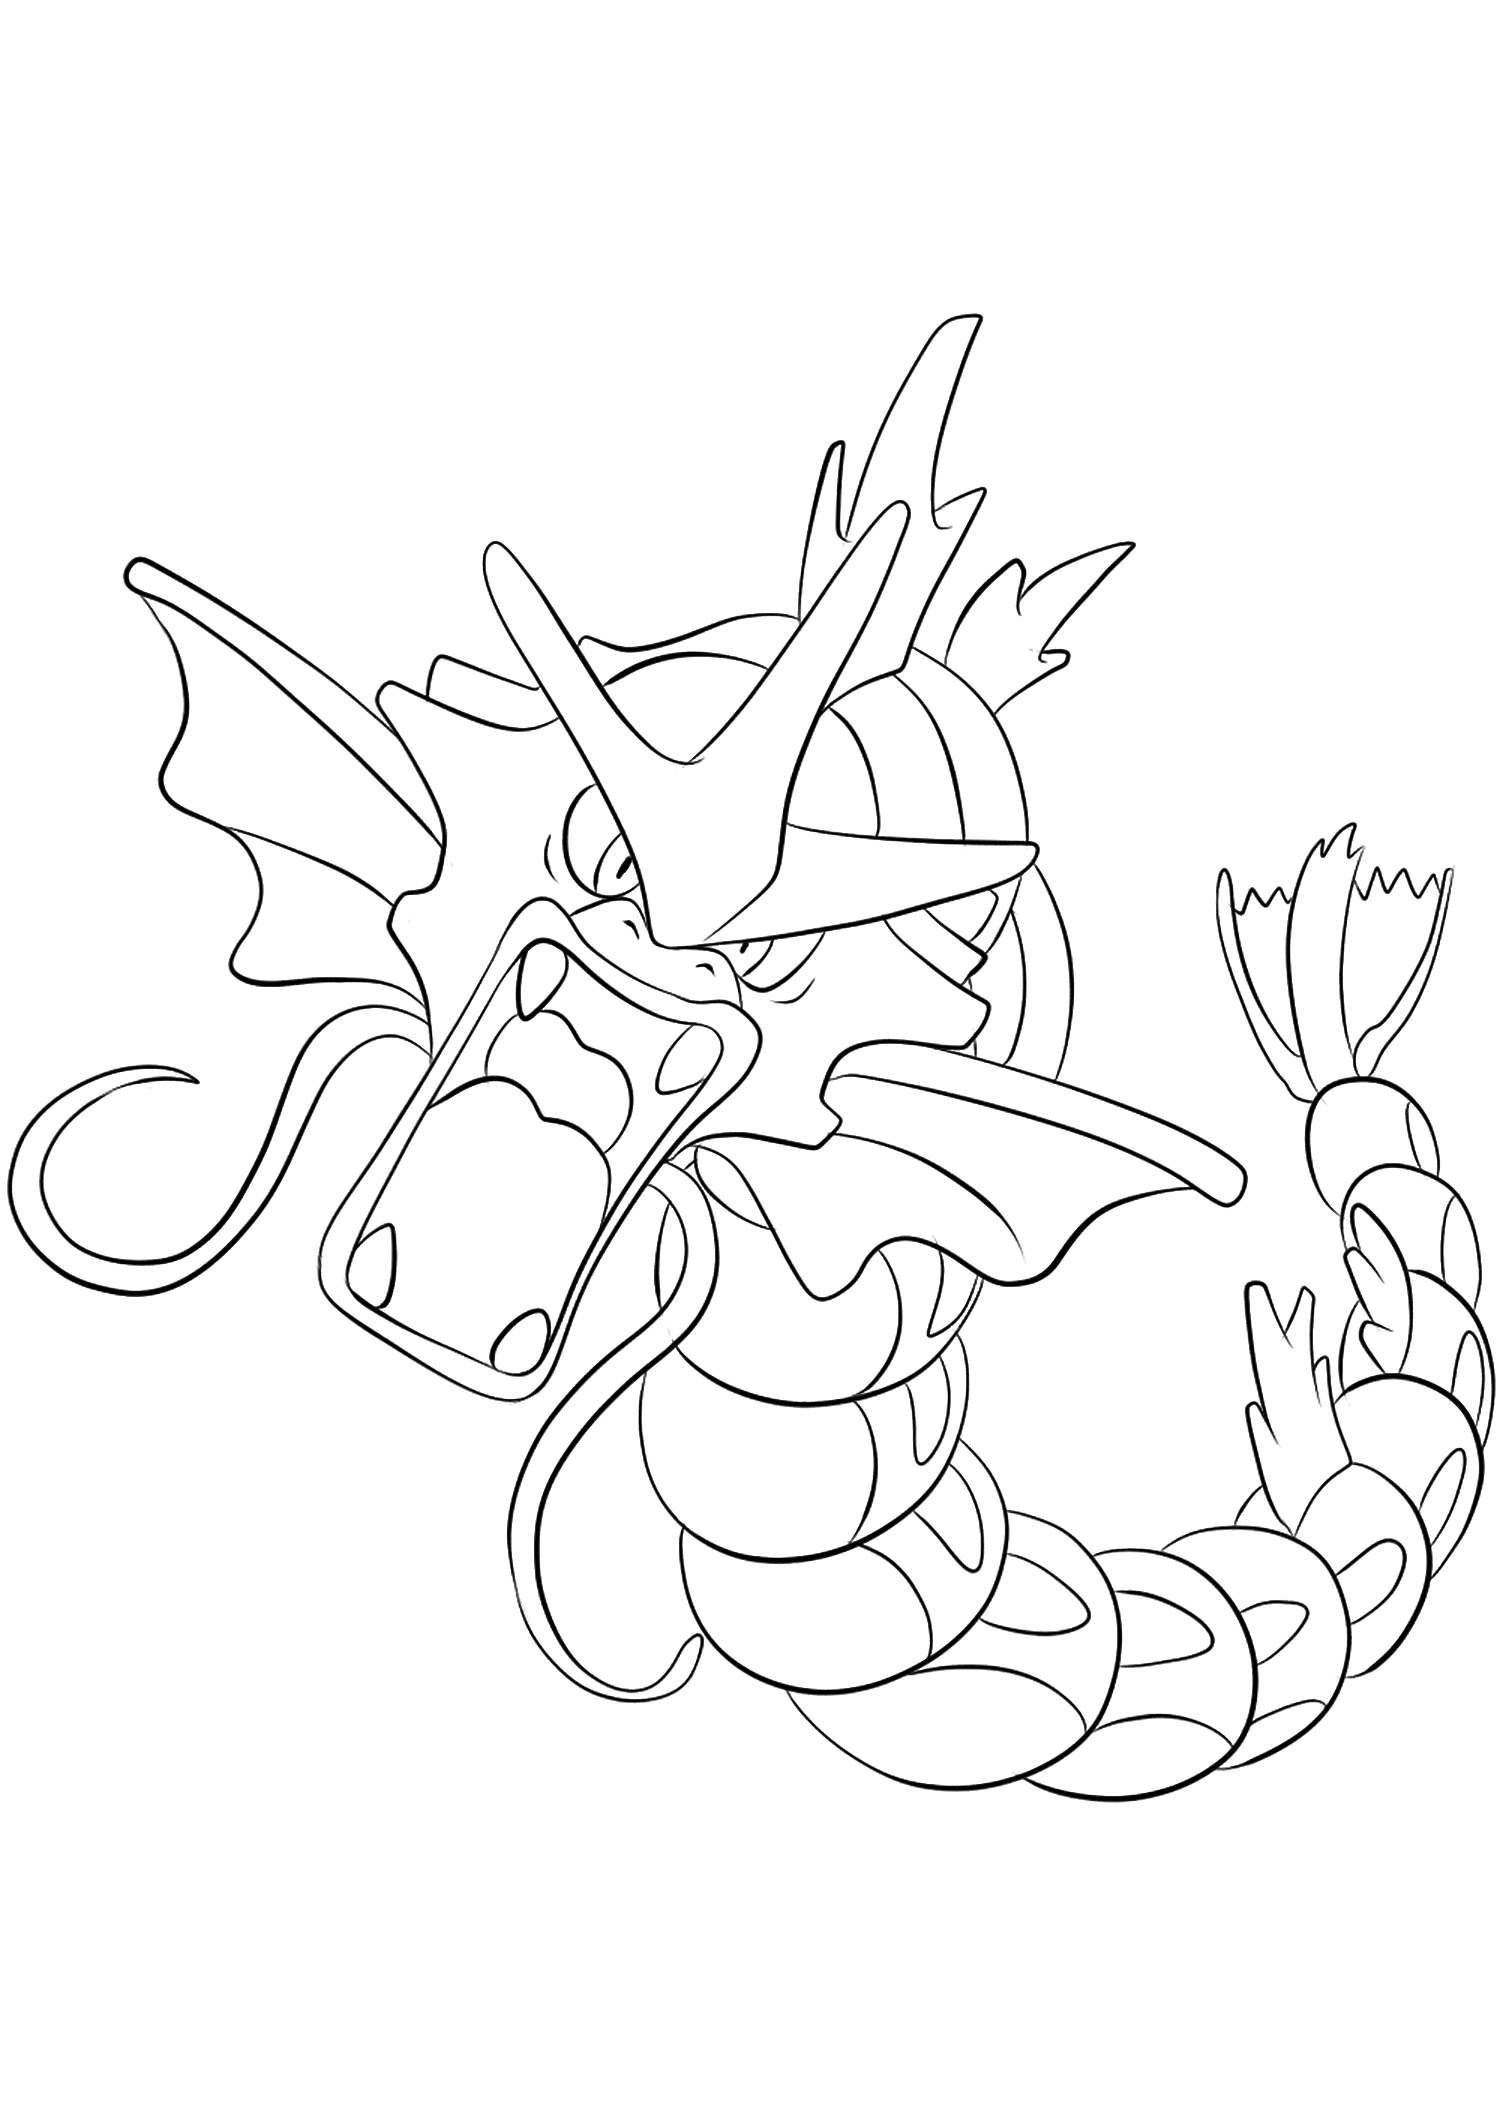 Gyarados (No.130)Gyarados Coloring page, Generation I Pokemon of type Water and FlyingOriginal image credit: Pokemon linearts by Lilly Gerbil on Deviantart.Permission:  All rights reserved © Pokemon company and Ken Sugimori.